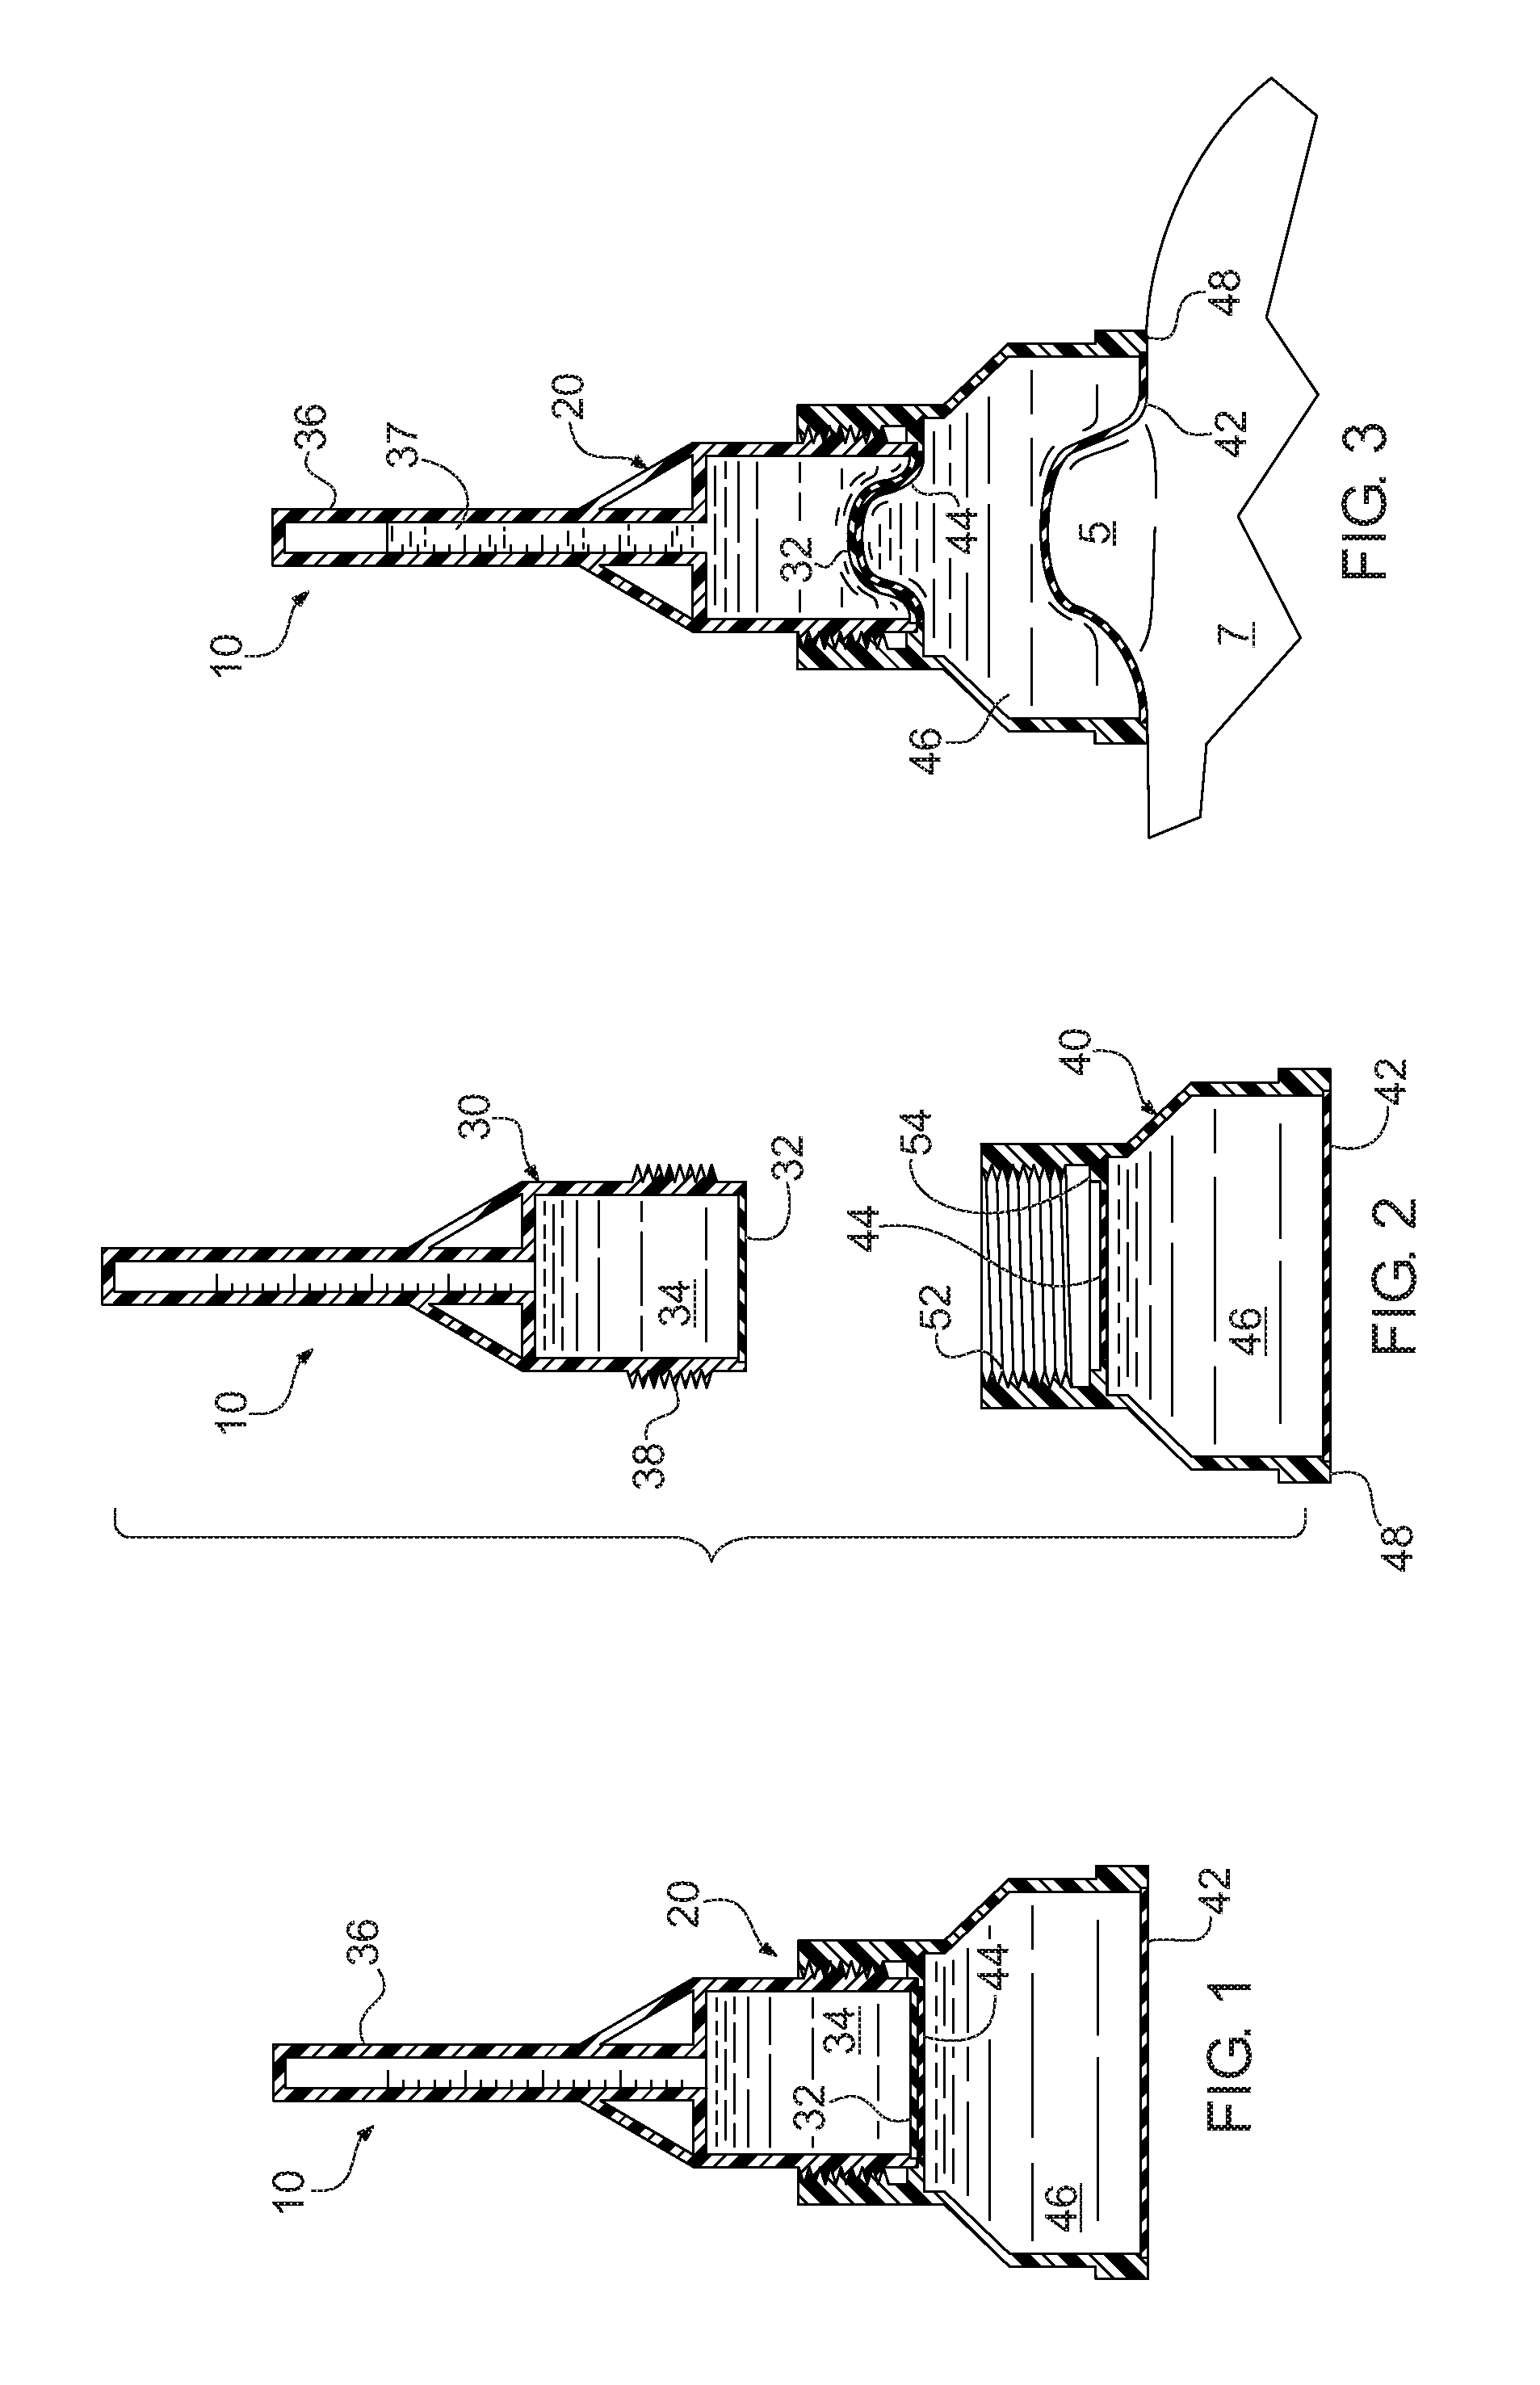 Method and Apparatus for Measuring Volume of Subcutaneous Tumors